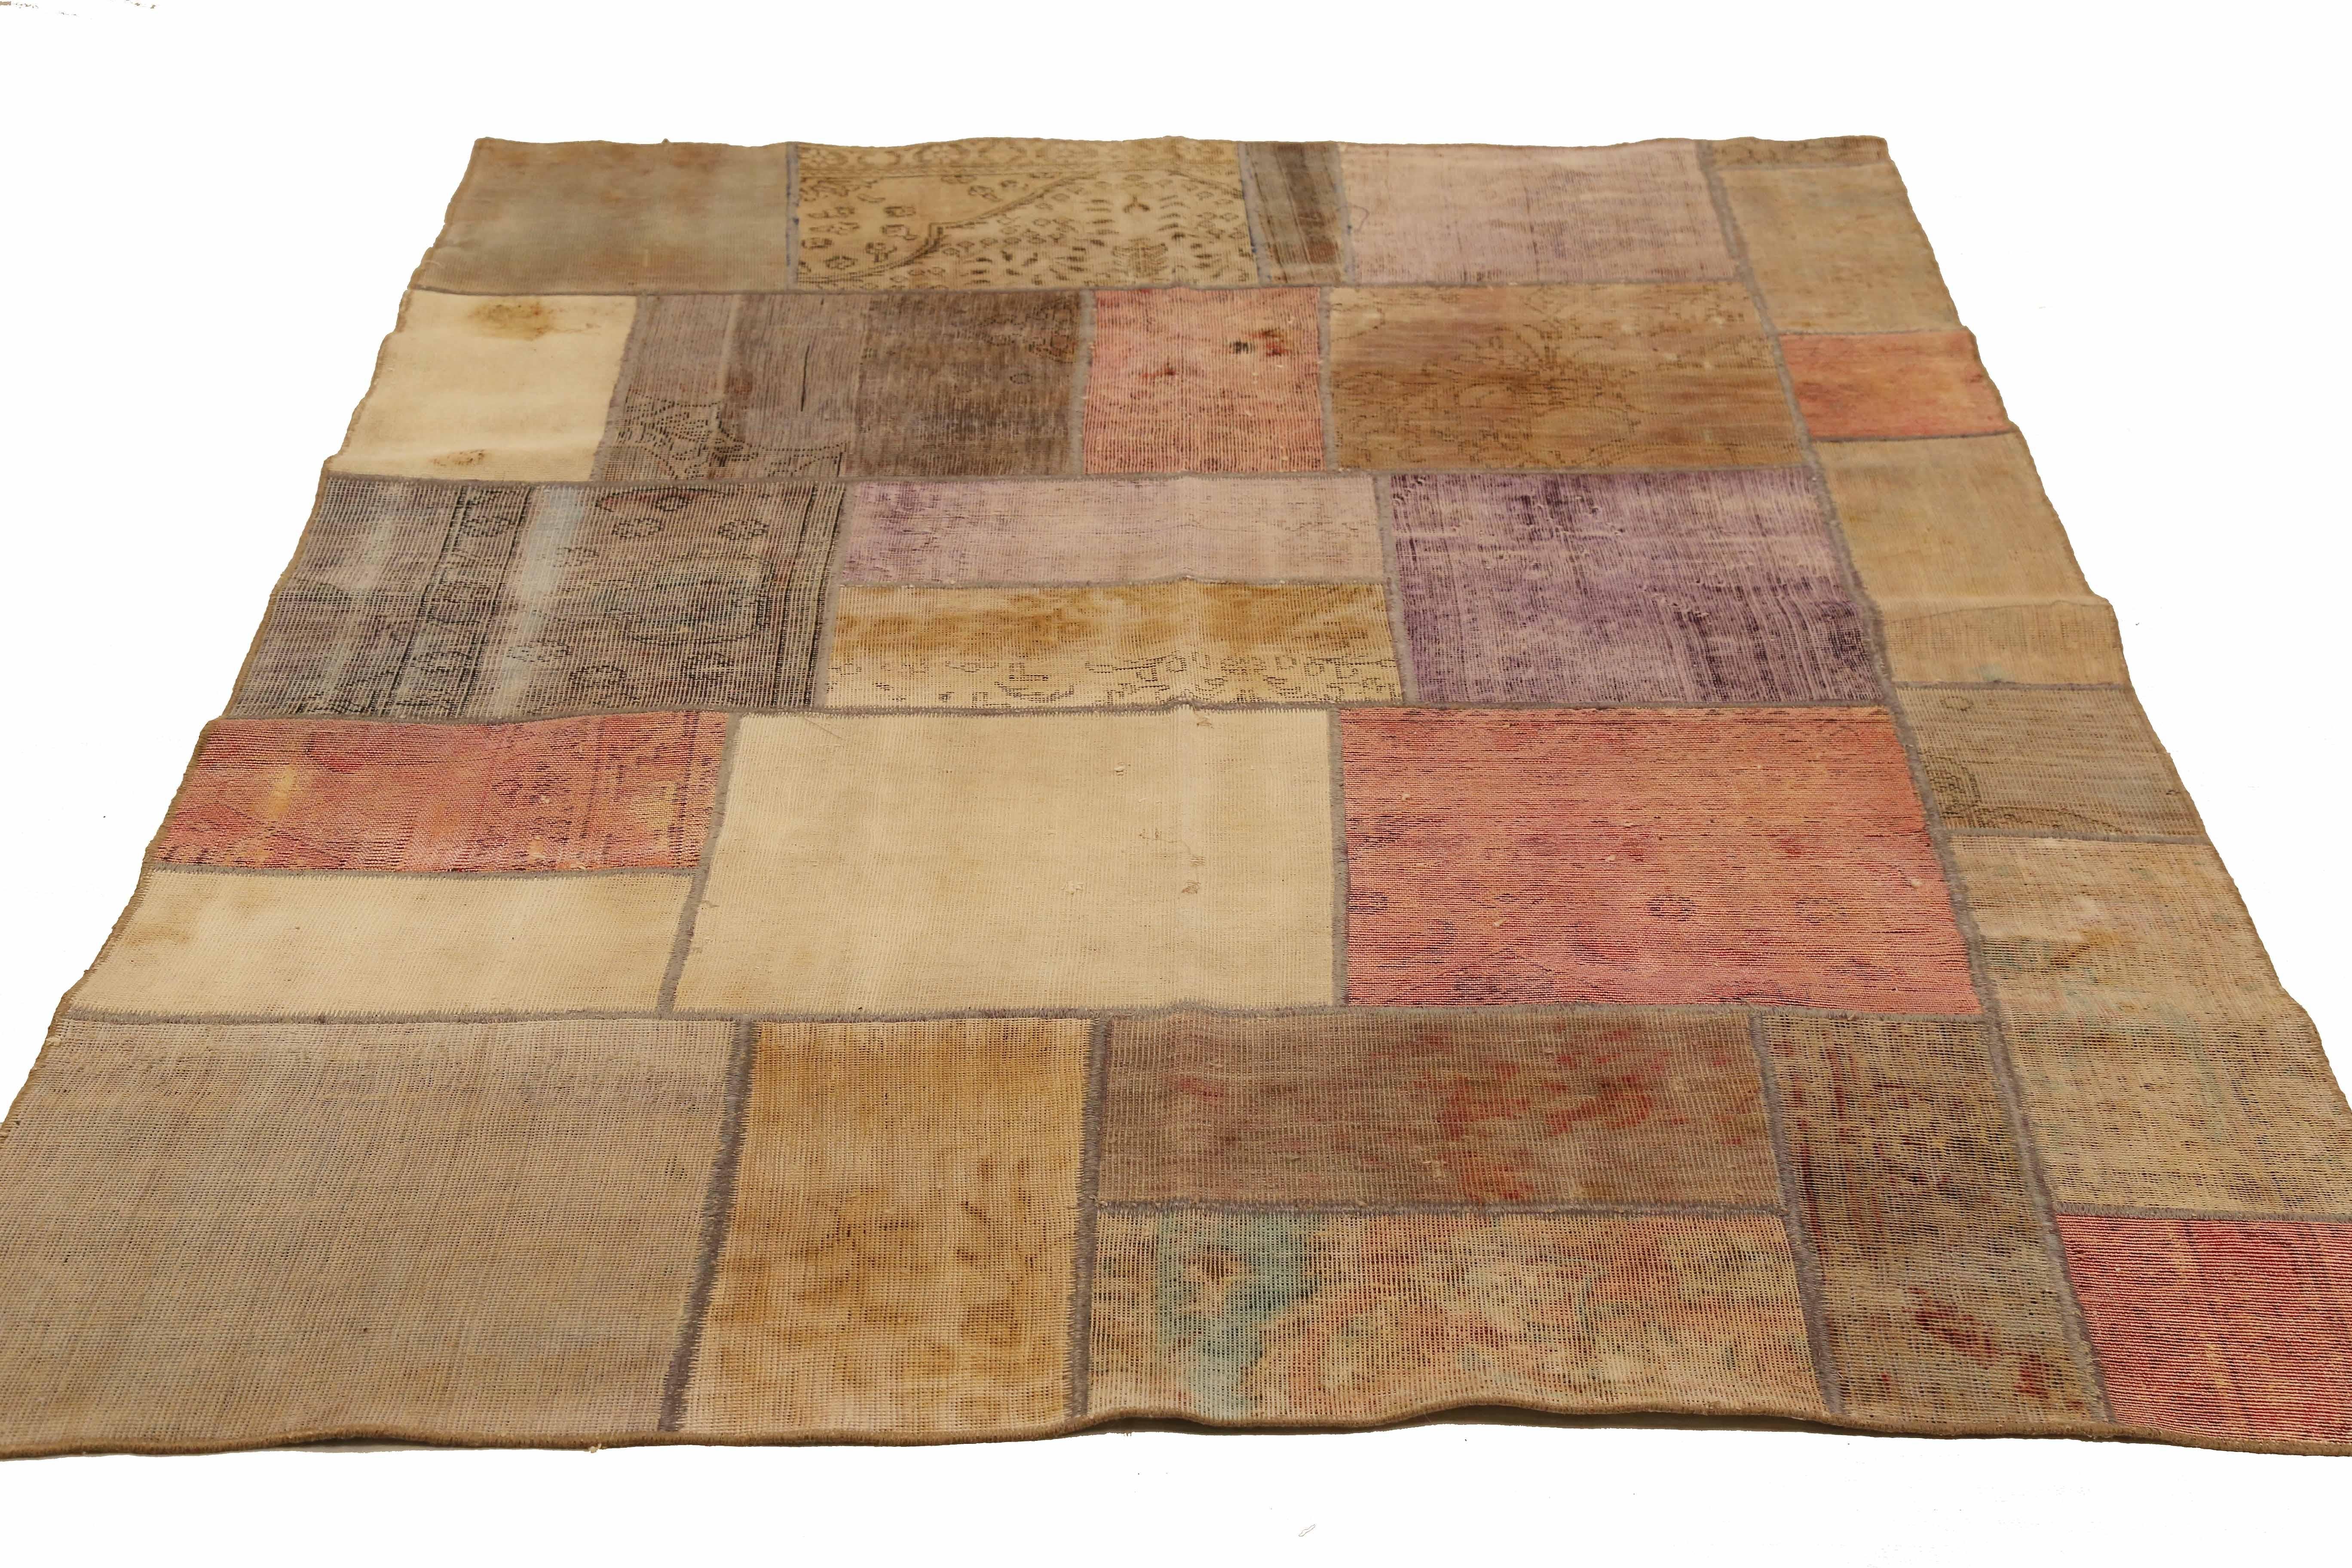 Contemporary handmade Persian area rug from high-quality sheep’s wool and colored with eco-friendly vegetable dyes that are proven safe for humans and pets alike. It’s a unique piece made of contemporary rugs with different design patterns and